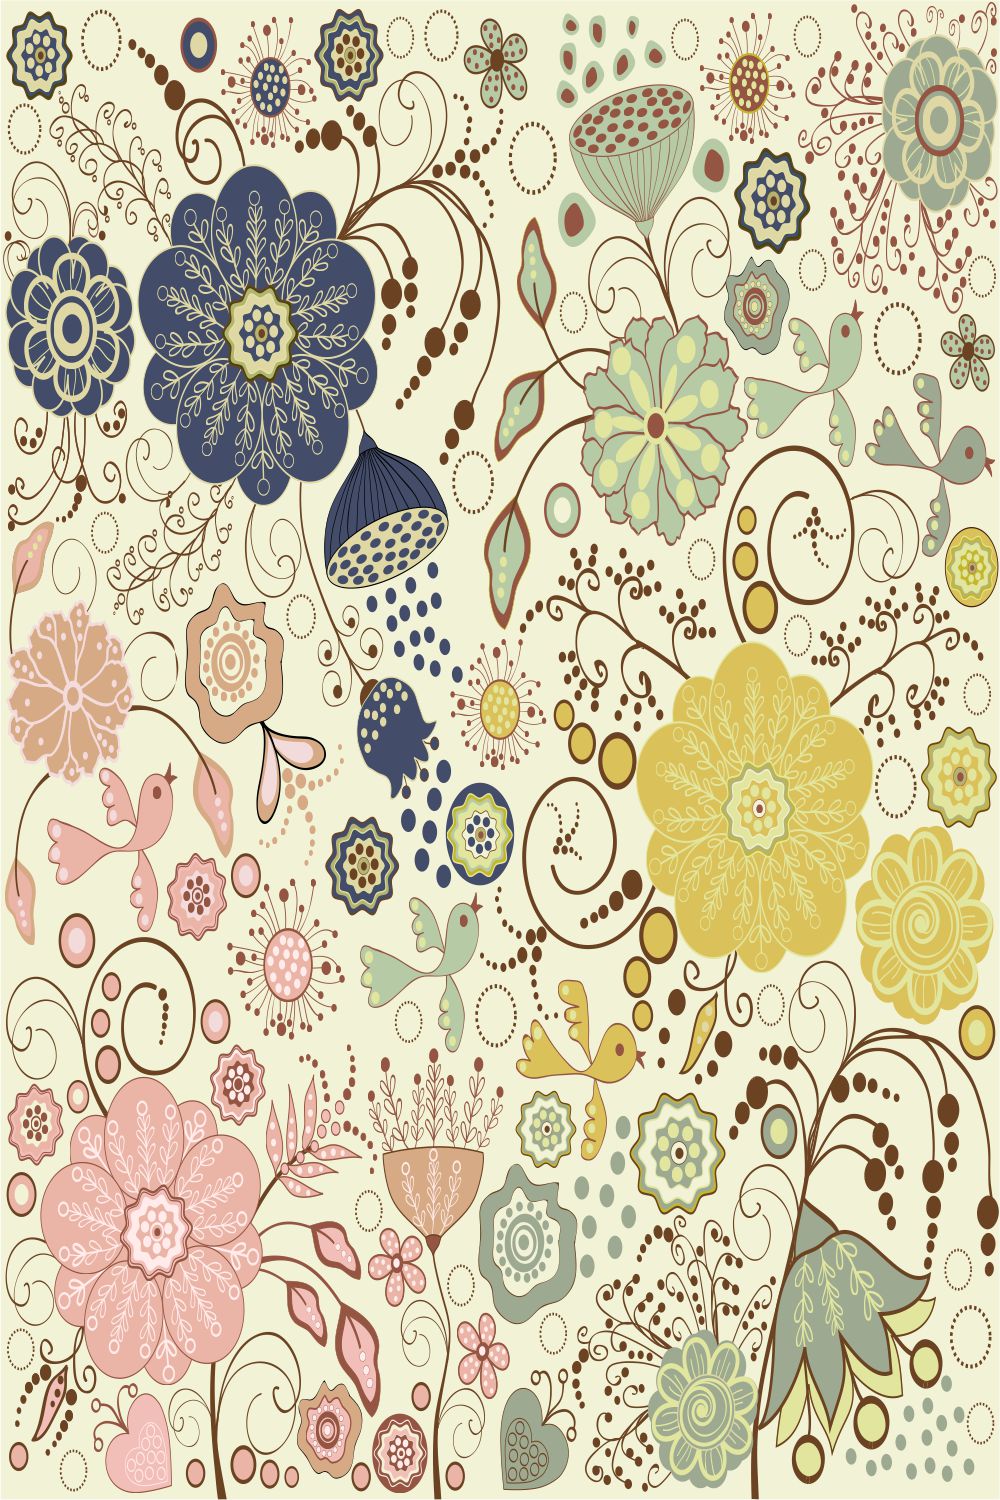 20 Plus Turkish Seamless Floral Patterns And Textures Pinterest Image.